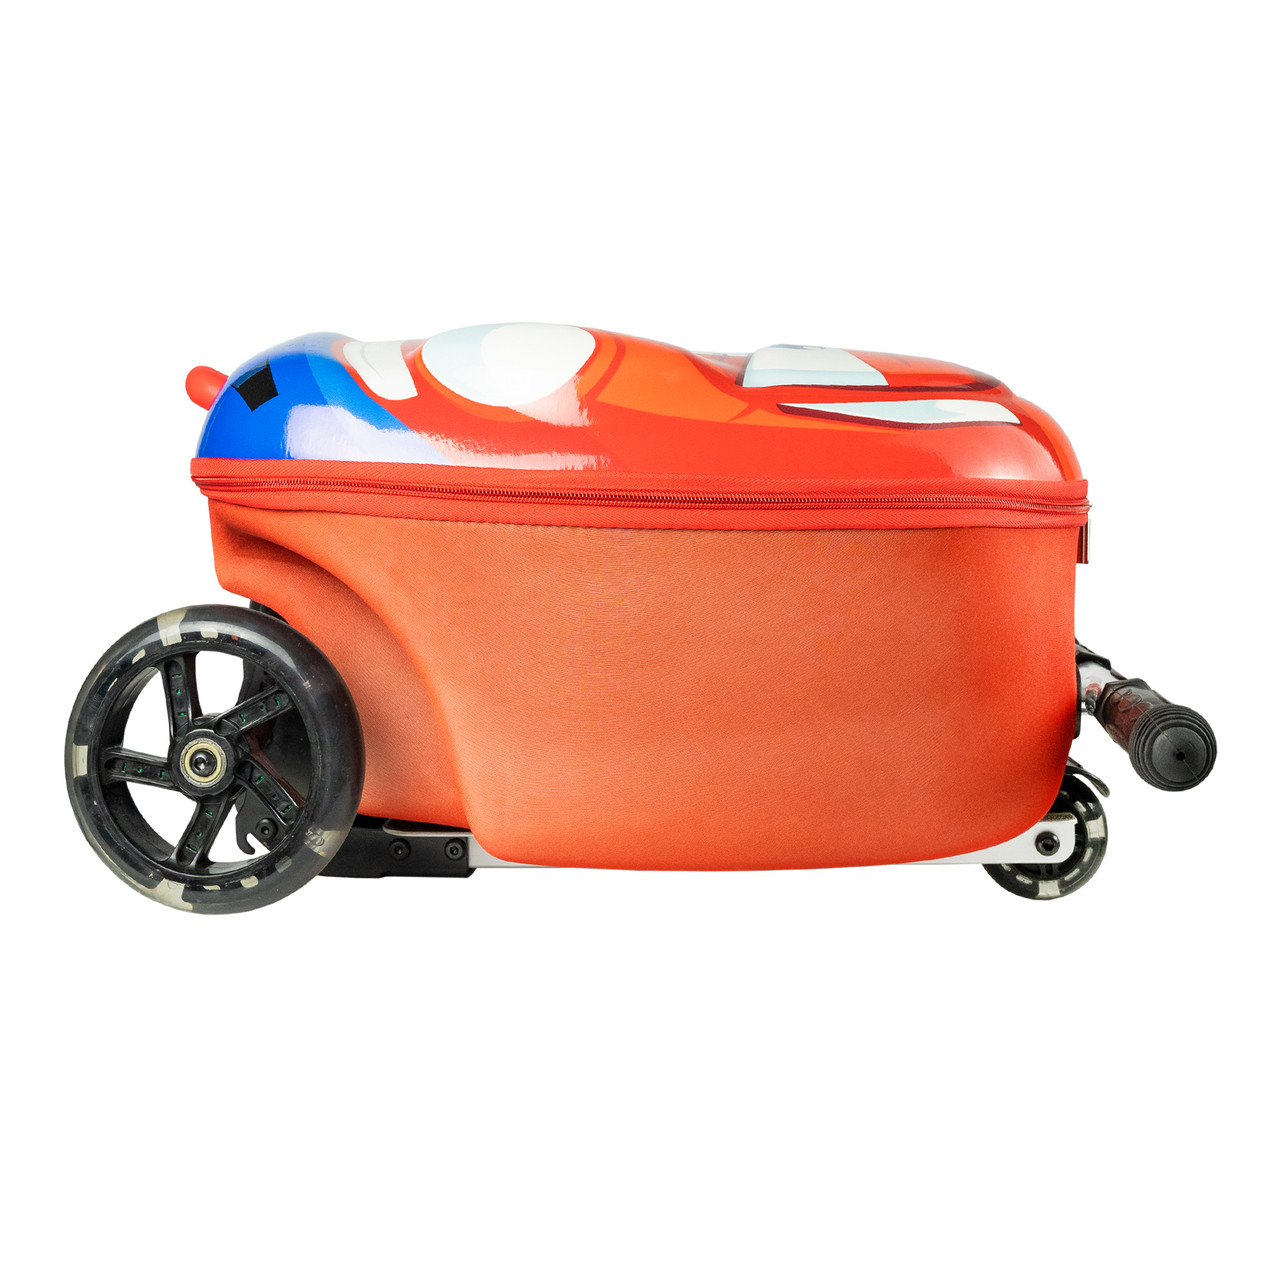 Kiddietotes Space Boy 3D Hard Shell Scooter Ride-On Suitcase for